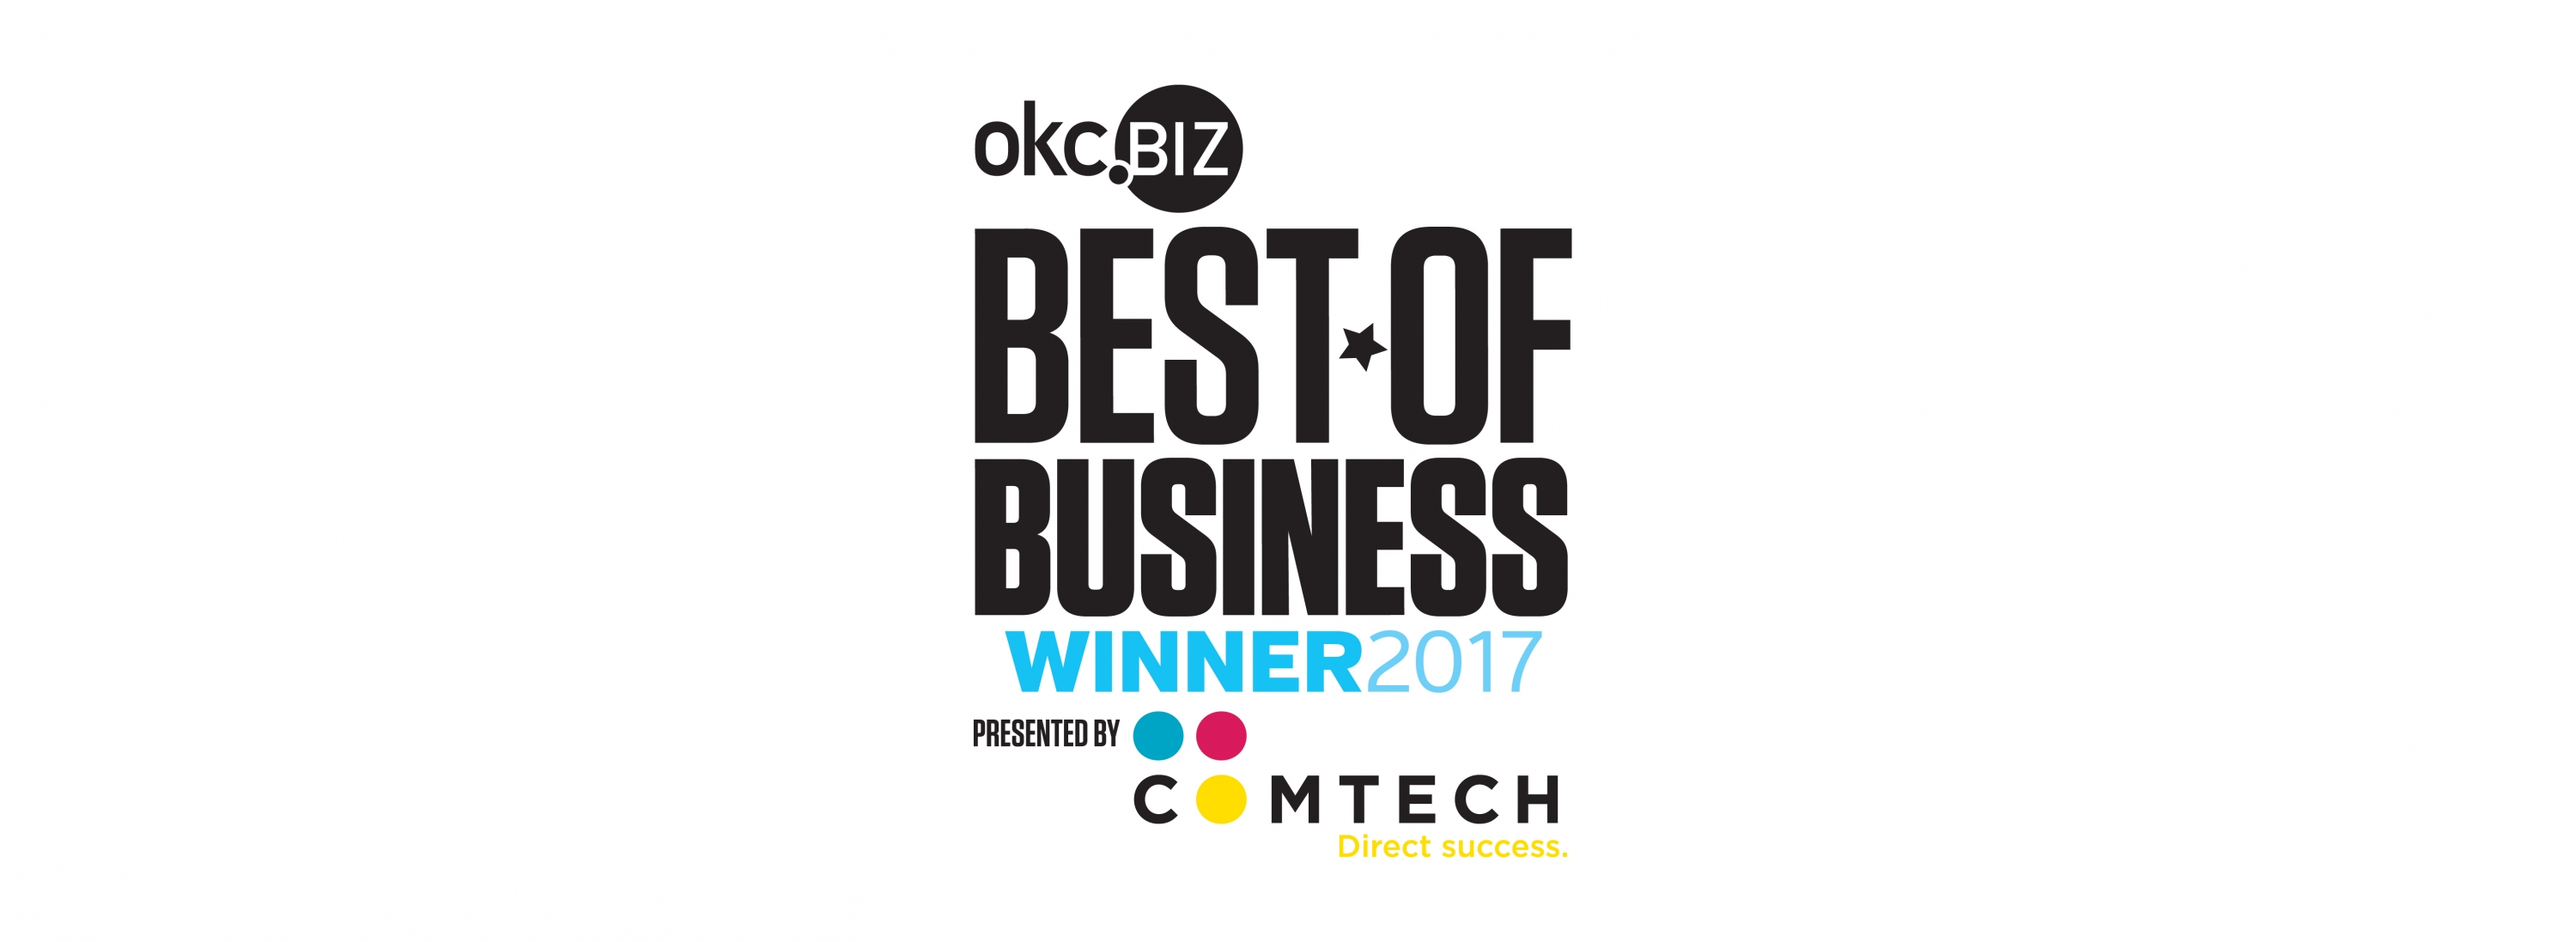 Best of Business 2017